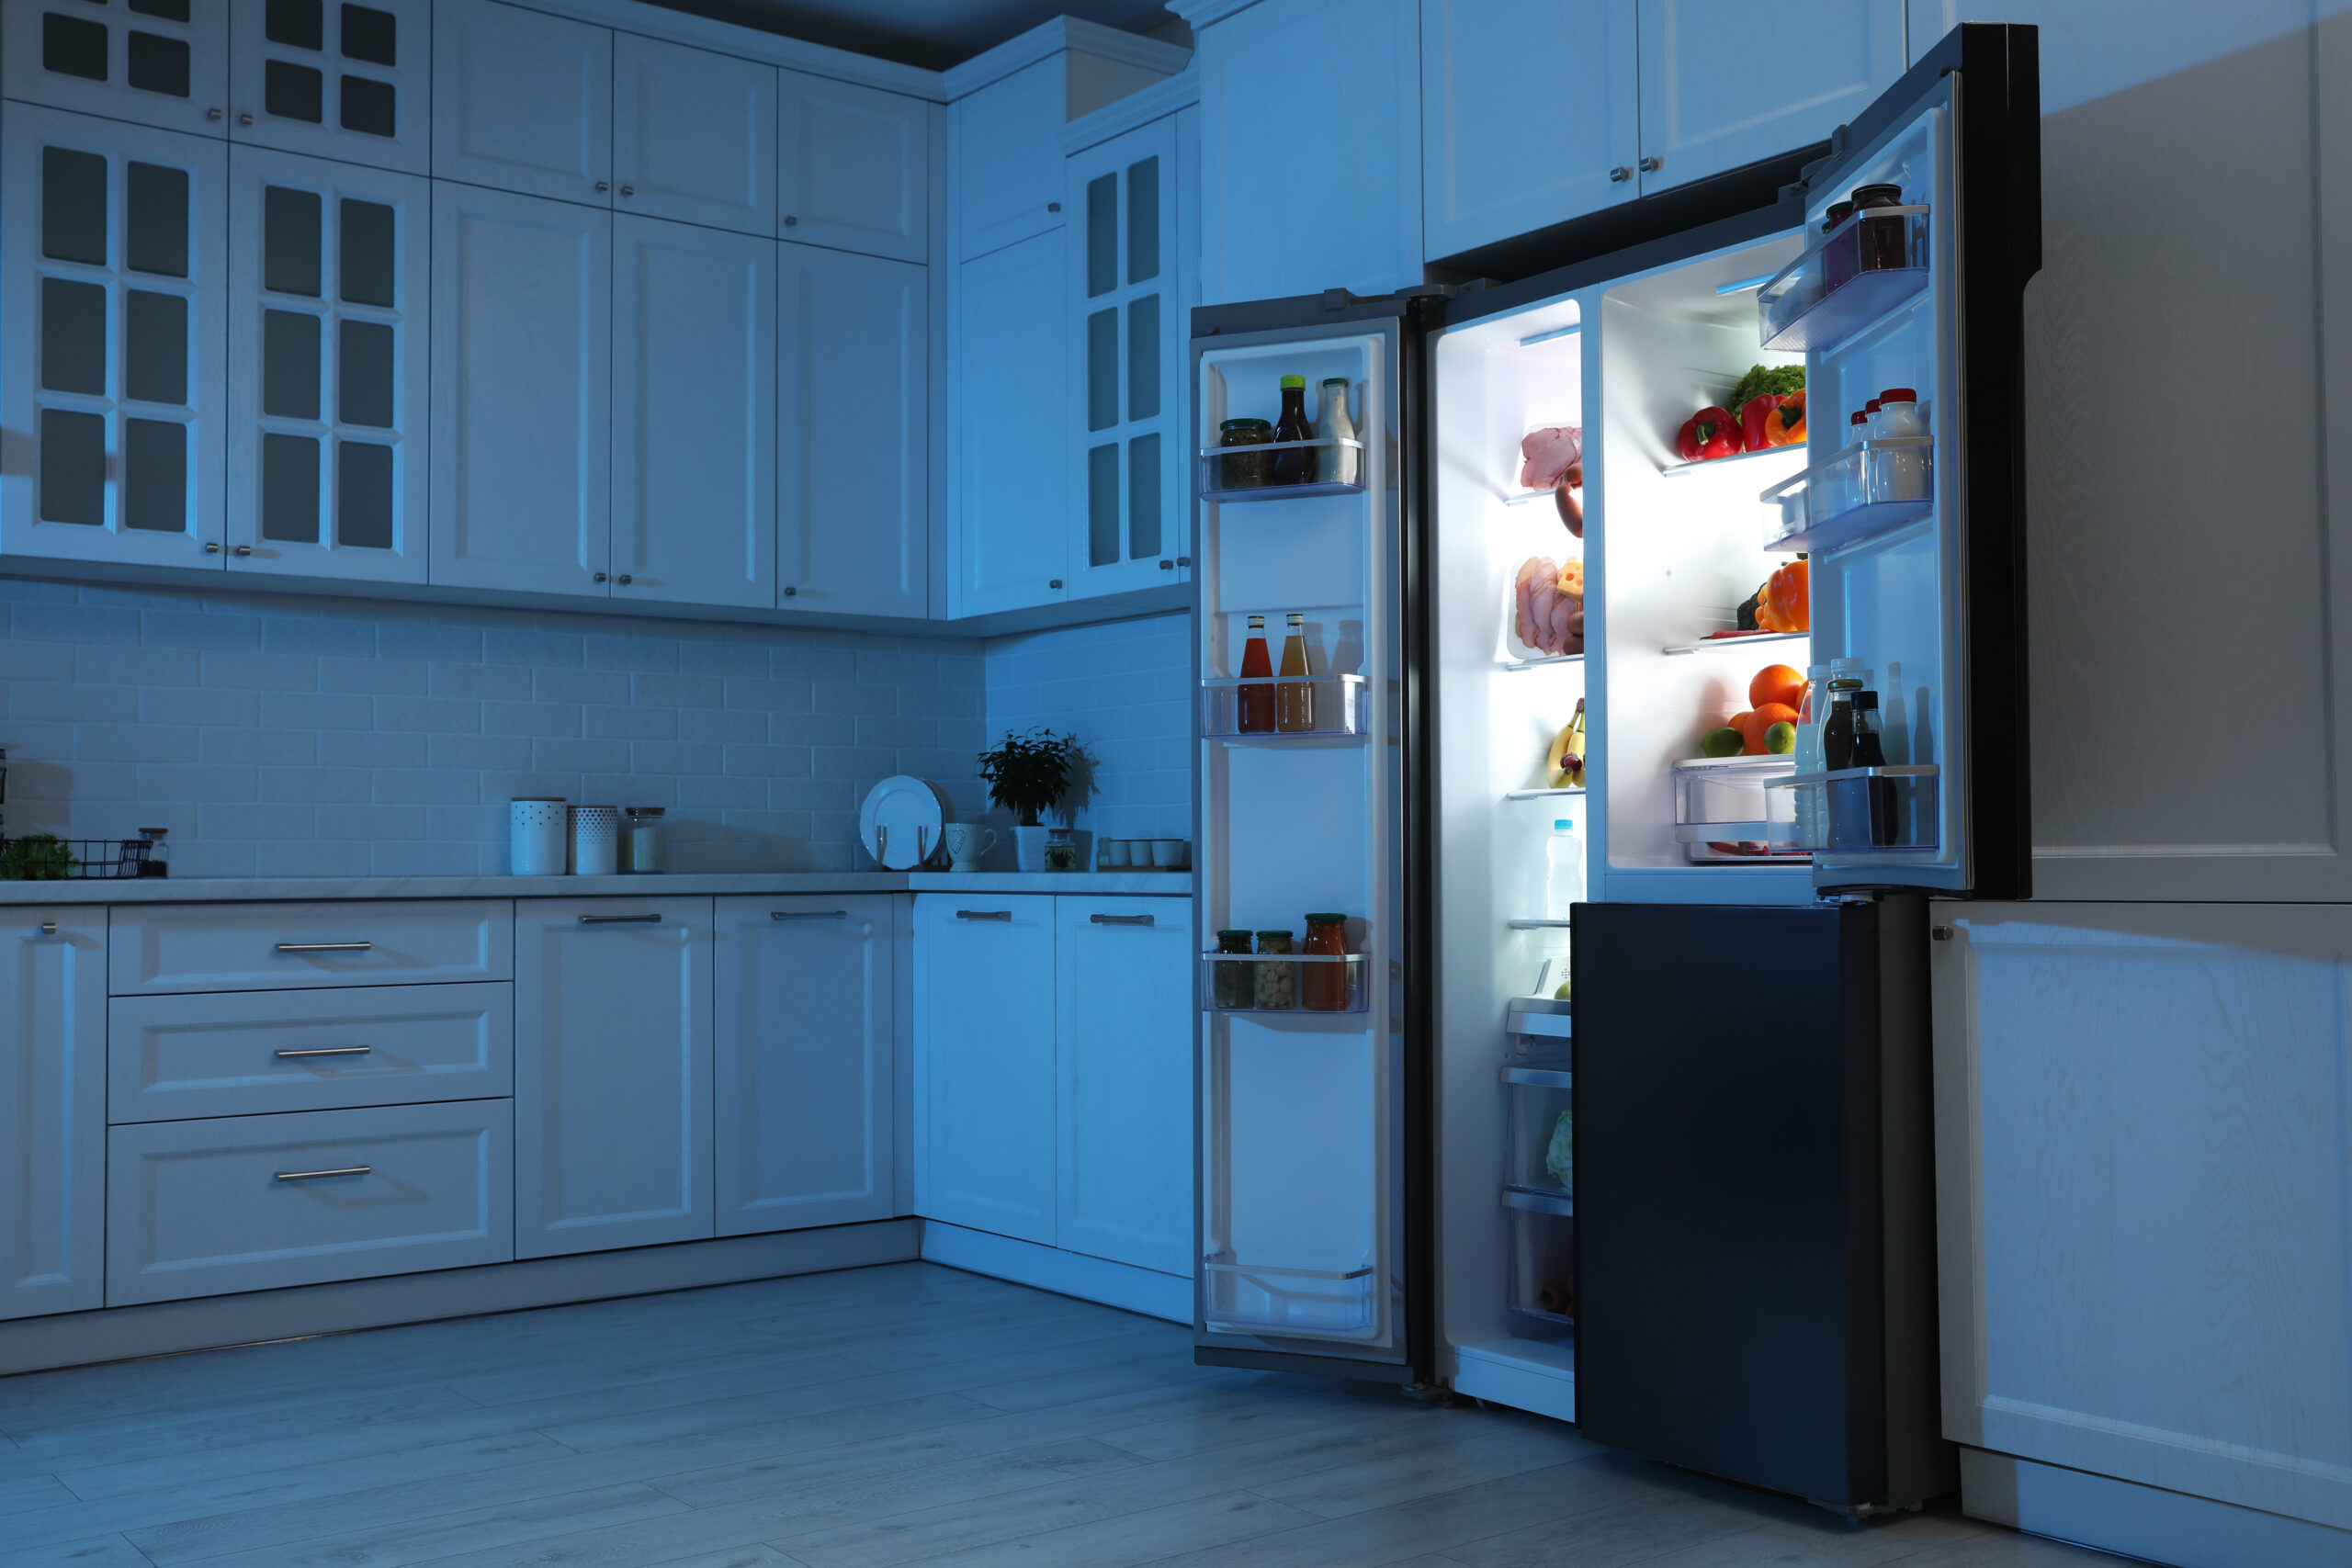 How Much Power Is Your Fridge Generating?